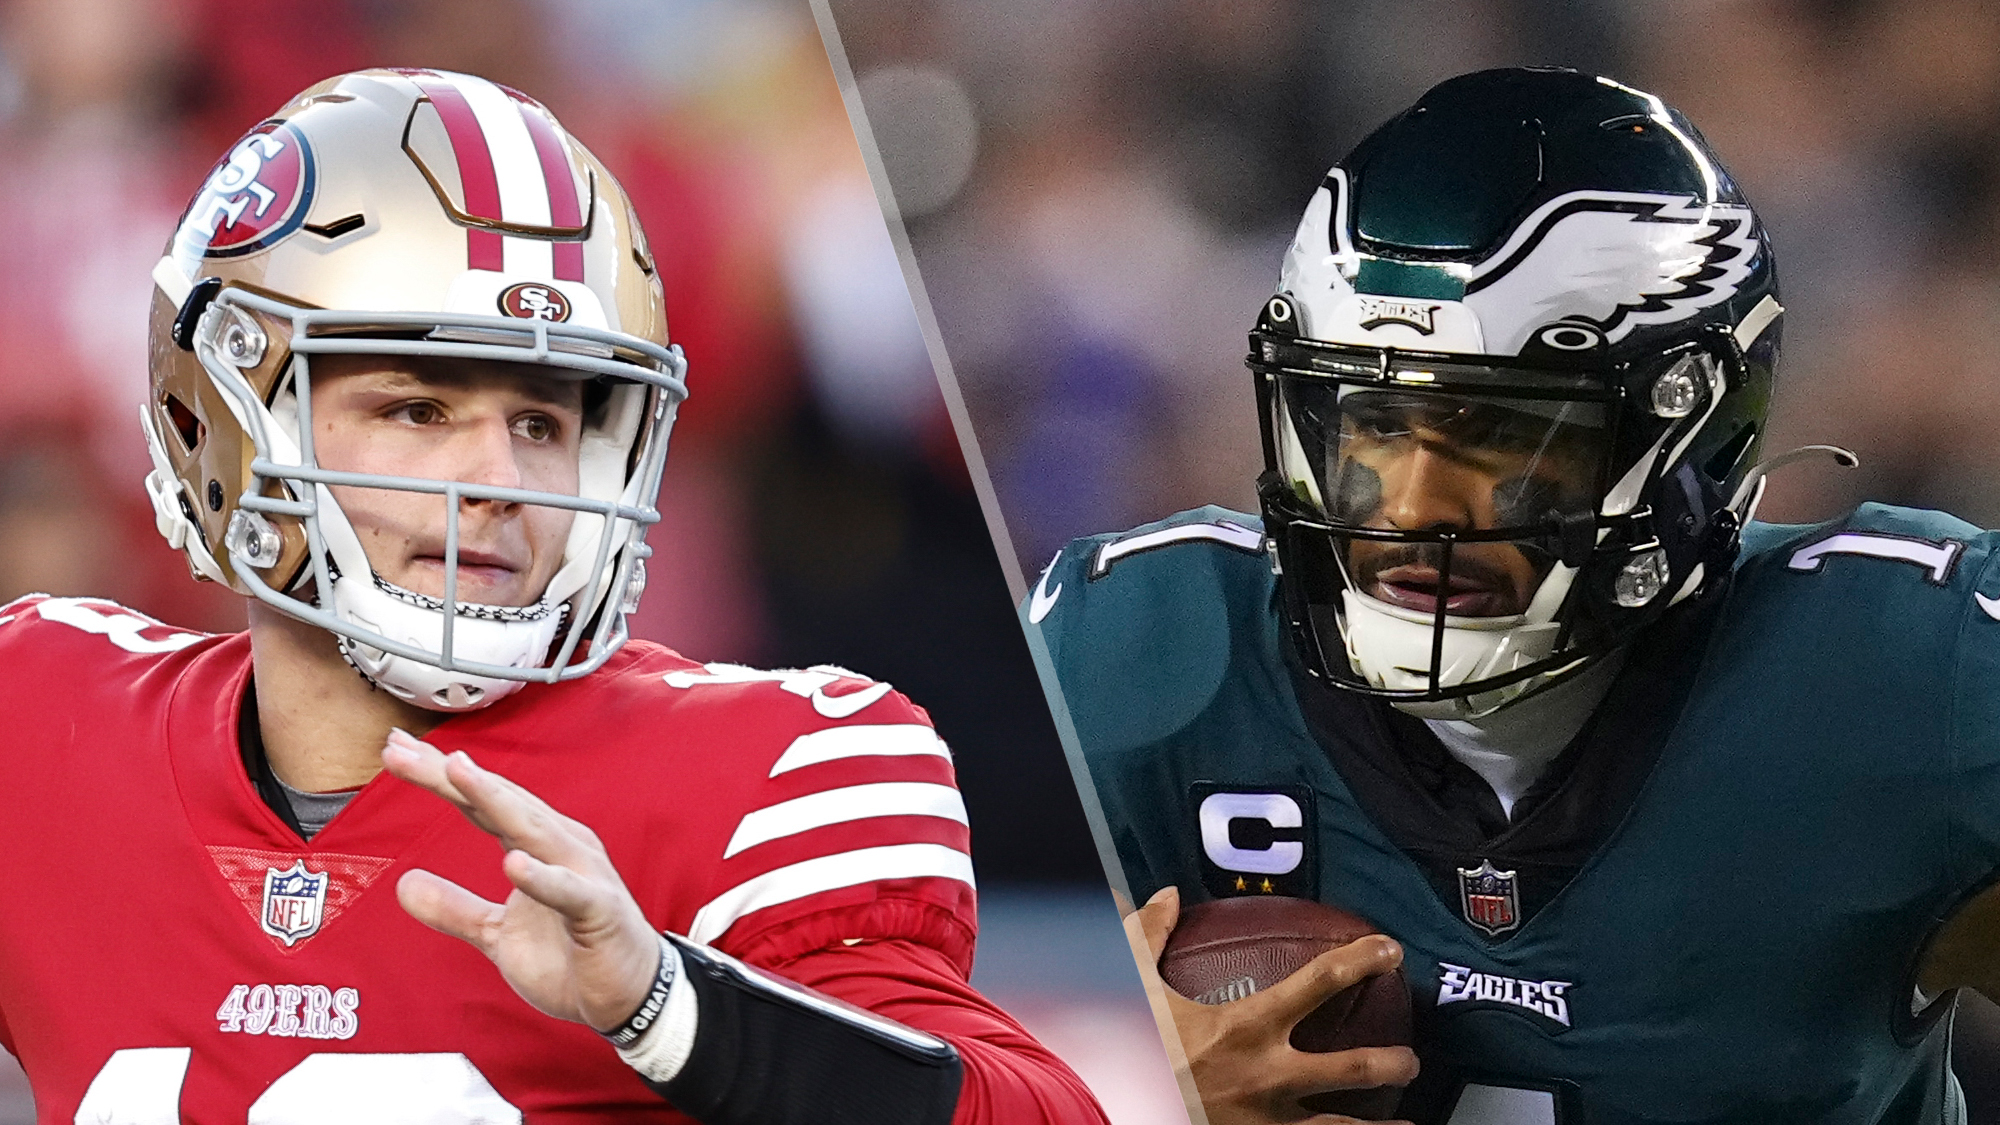 49ers vs Eagles live stream How to watch NFC Championship game online